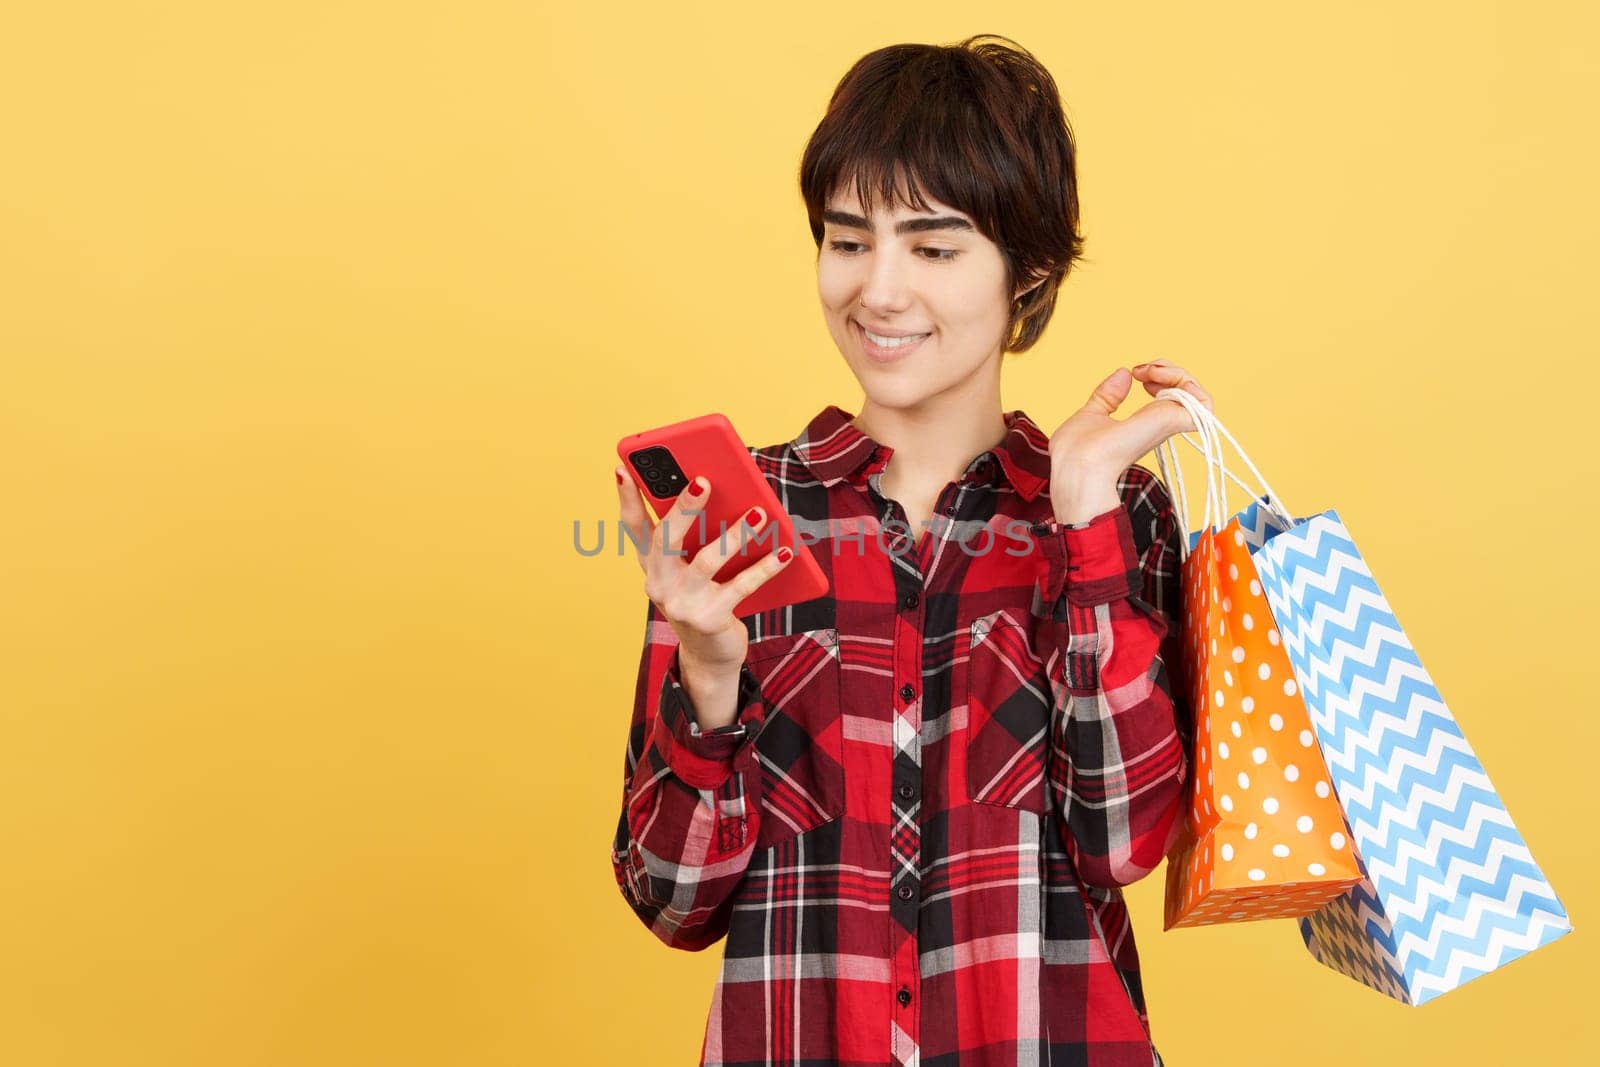 Androgynous person using a mobile while holding shopping bags in studio with yellow background